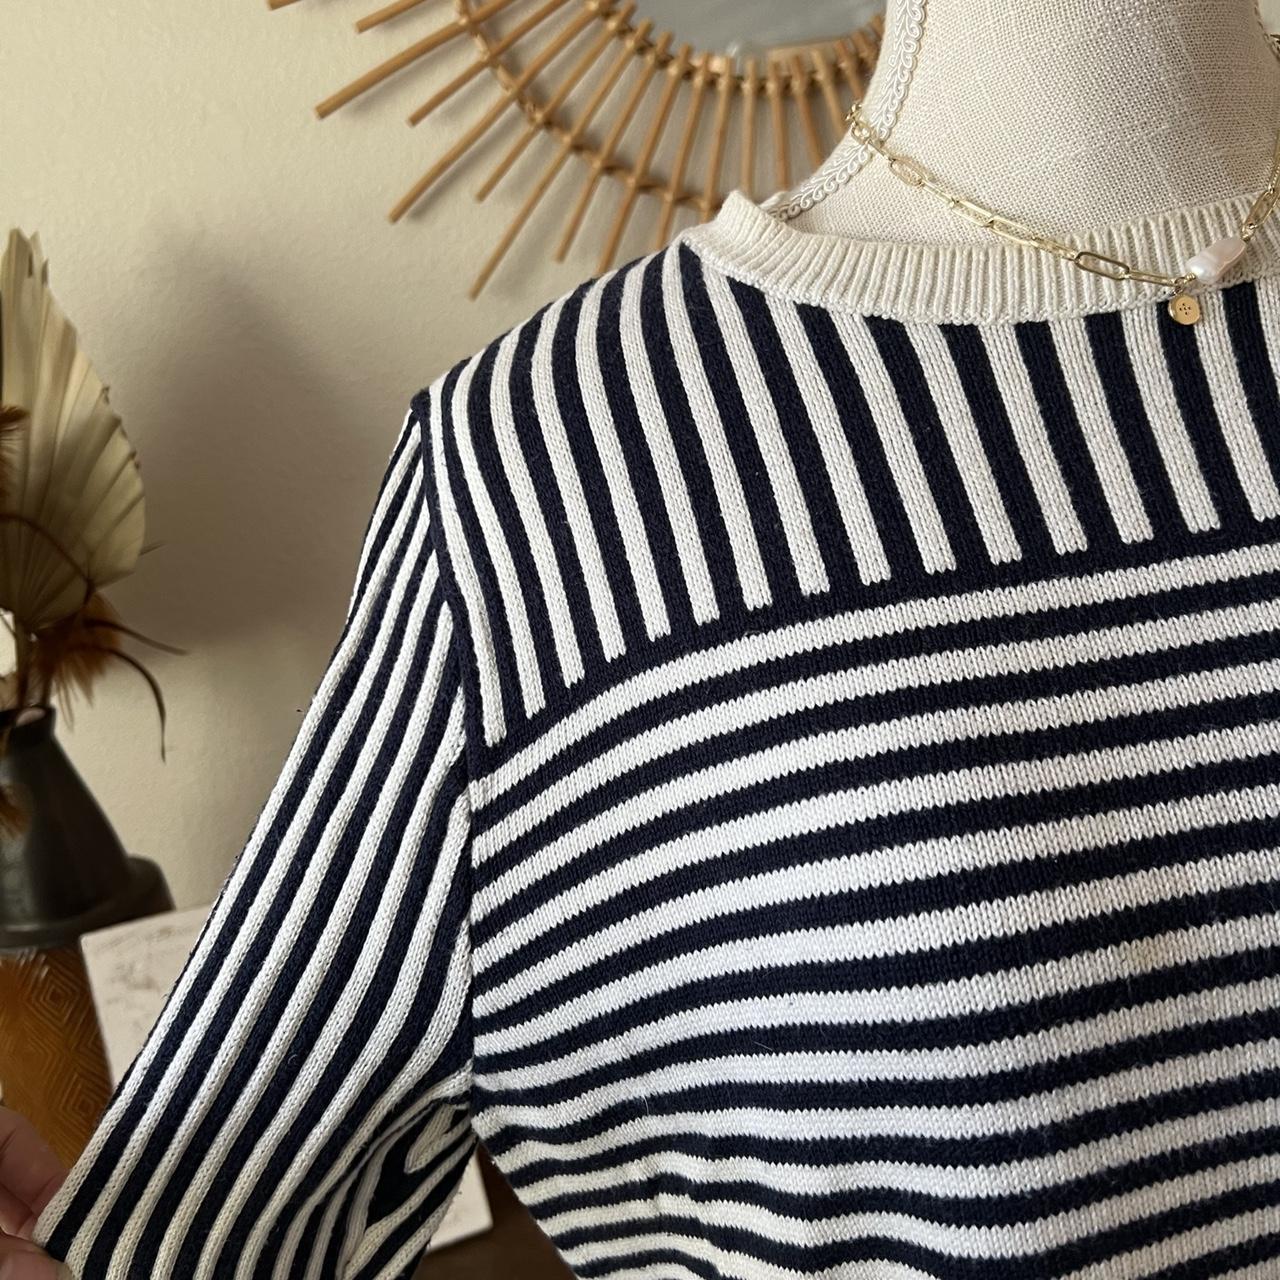 Product Image 2 - Hilfiger white and navy stripes